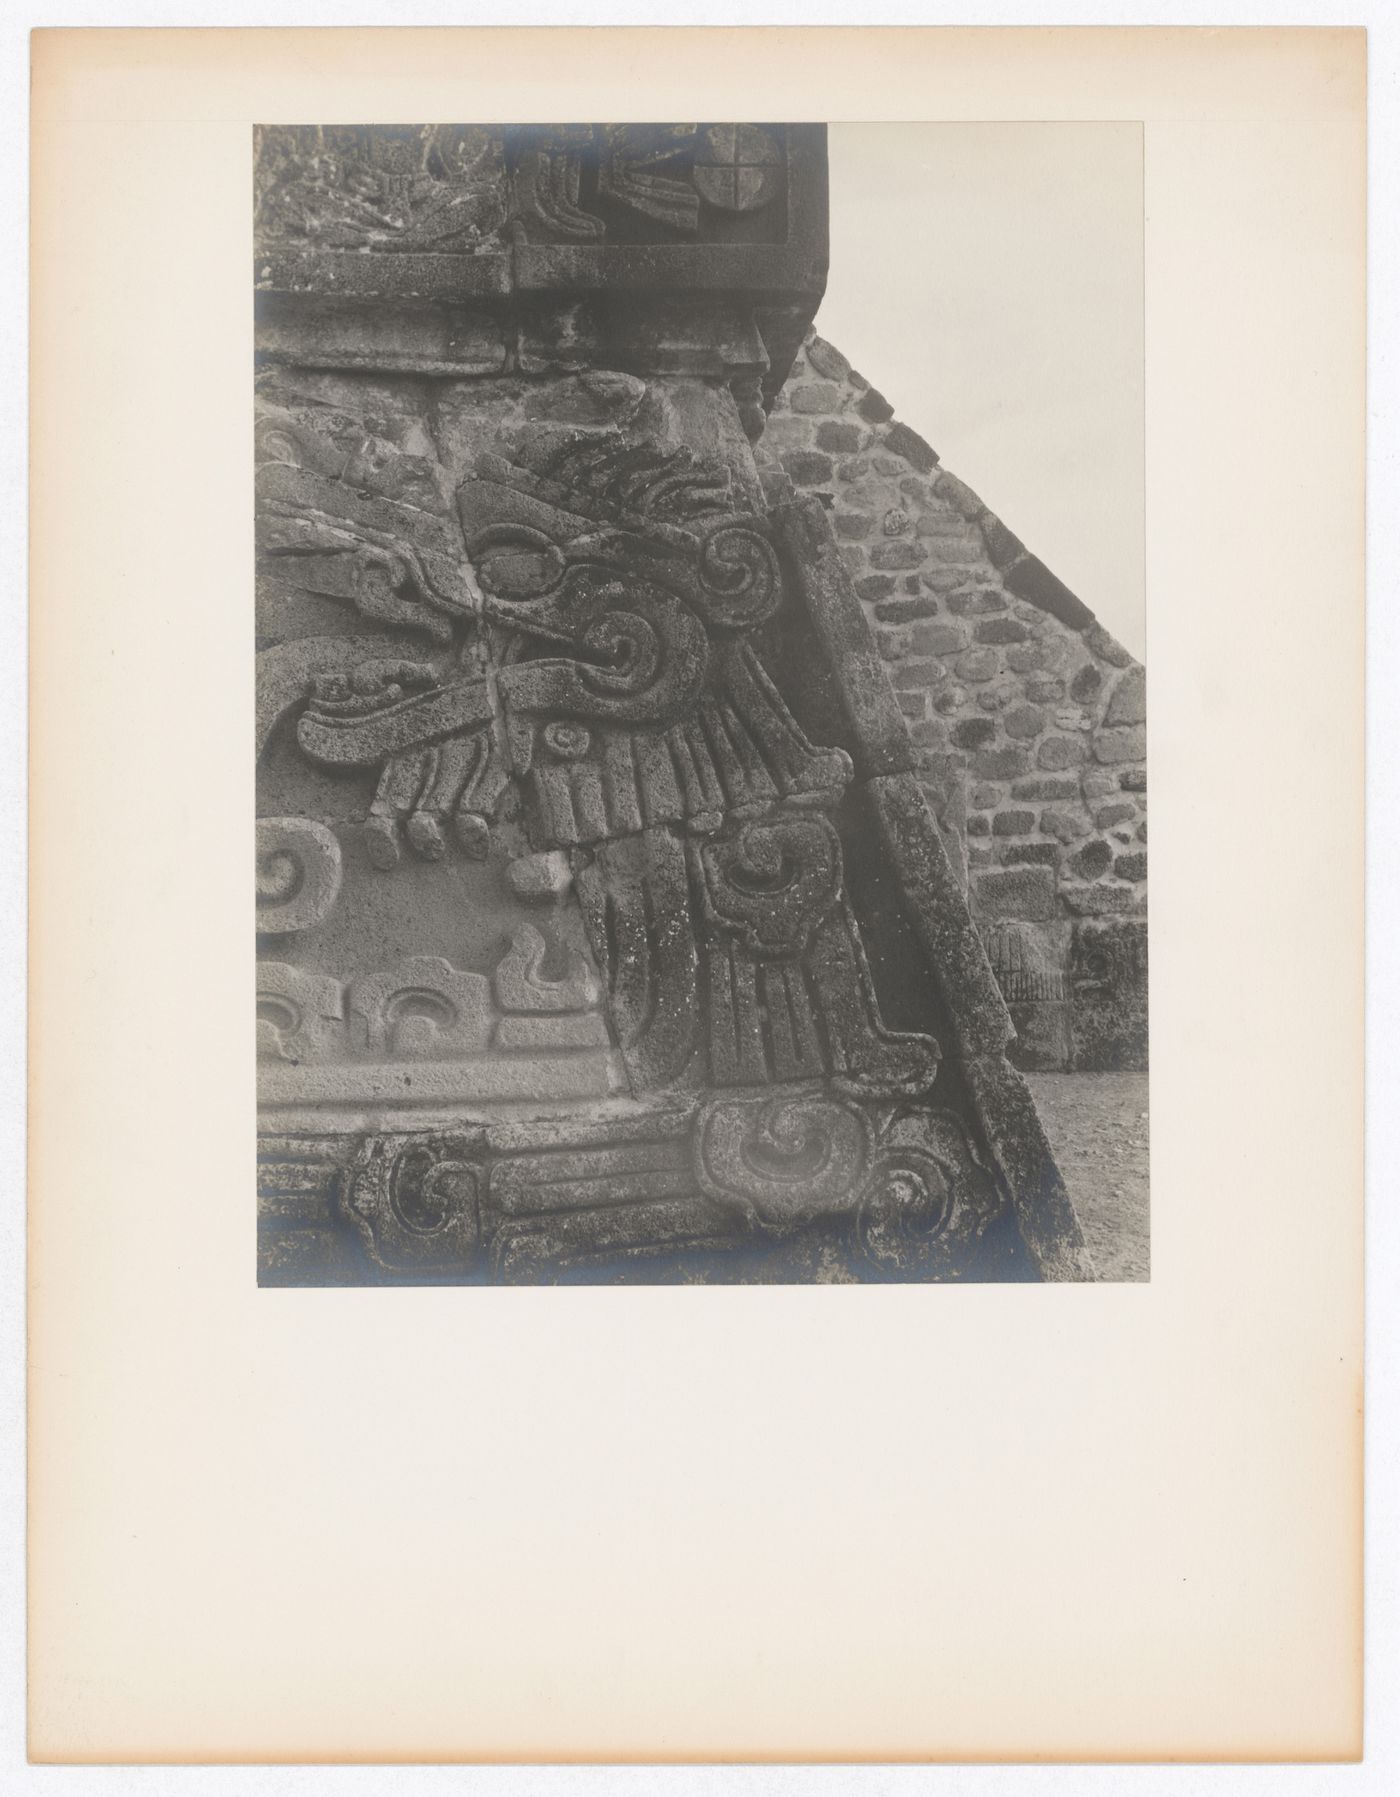 Partial view of a pyramid, possibly known as the Pyramid of the Feathered Serpent, Xochicalco Site, Xochicalco, Mexico